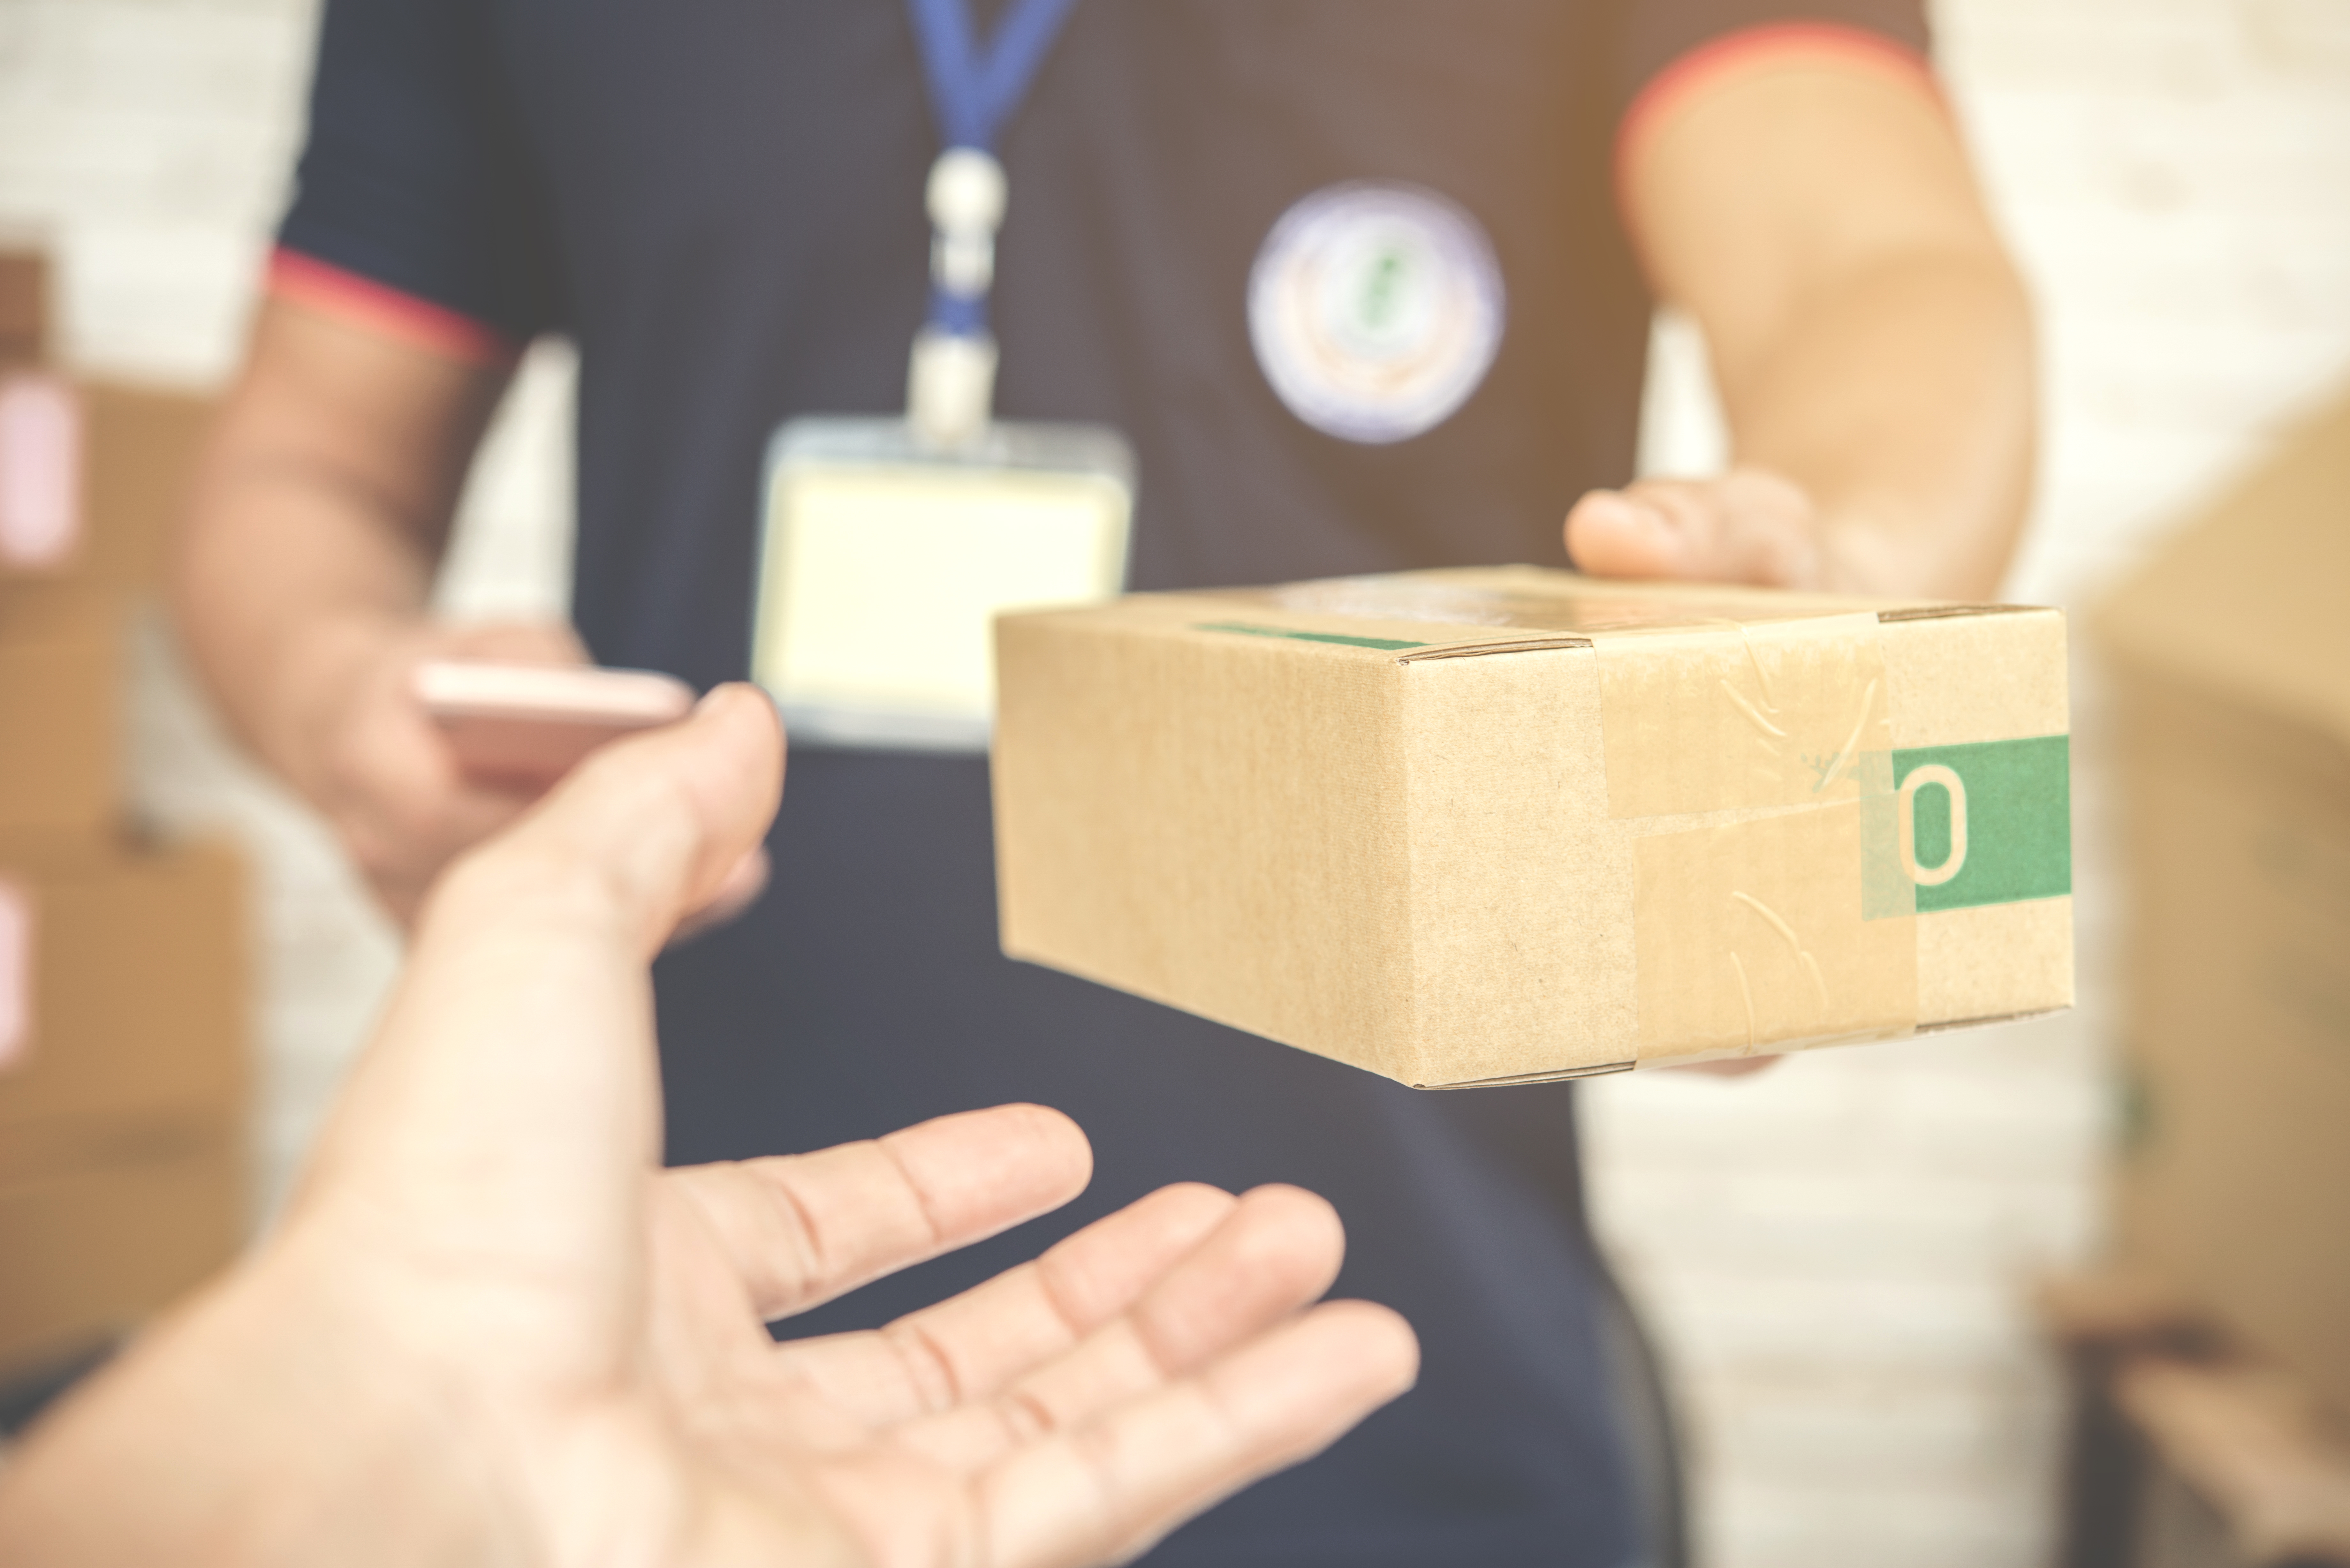 Coronavirus: How to safely handle express parcels